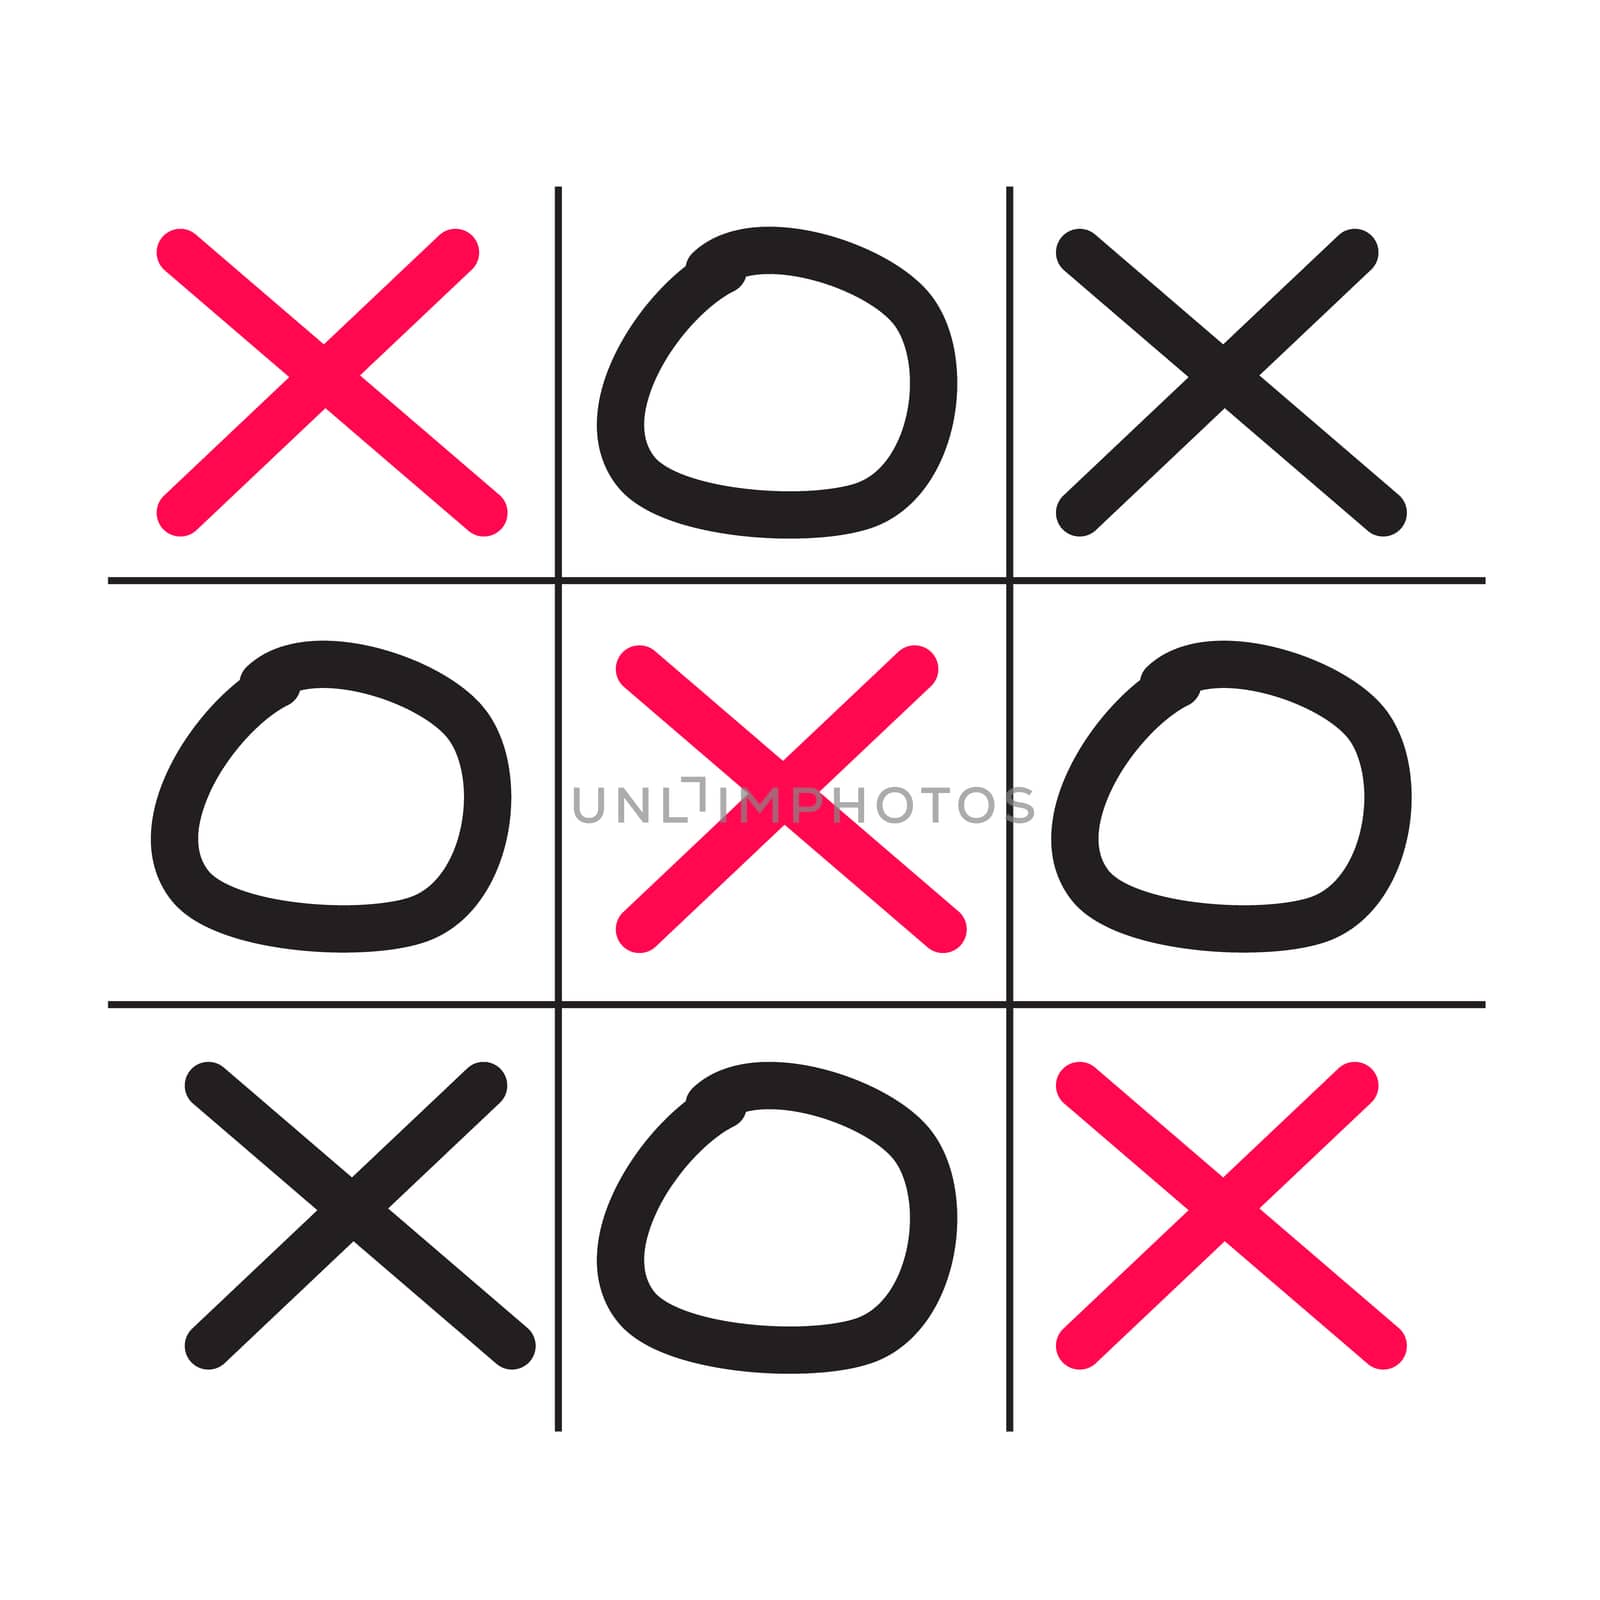 tictactoe game icon on white background. flat style. tictactoe game icon for your web site design, logo, app, UI. game symbol. tictactoe sign. 